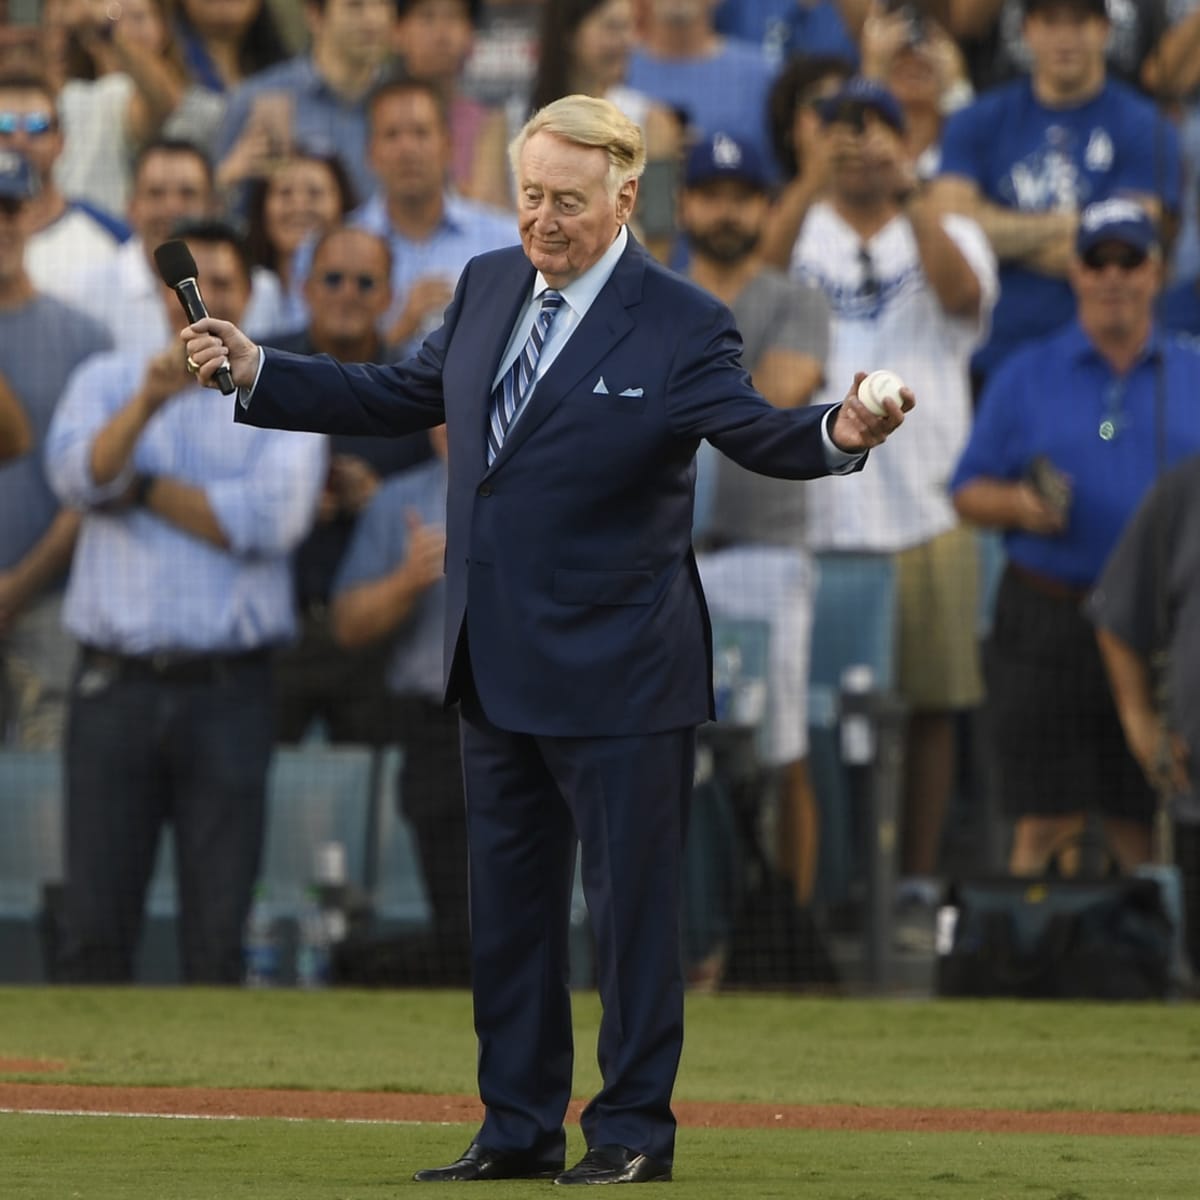 Vin Scully dies at 94: MLB world remembers legendary Dodgers